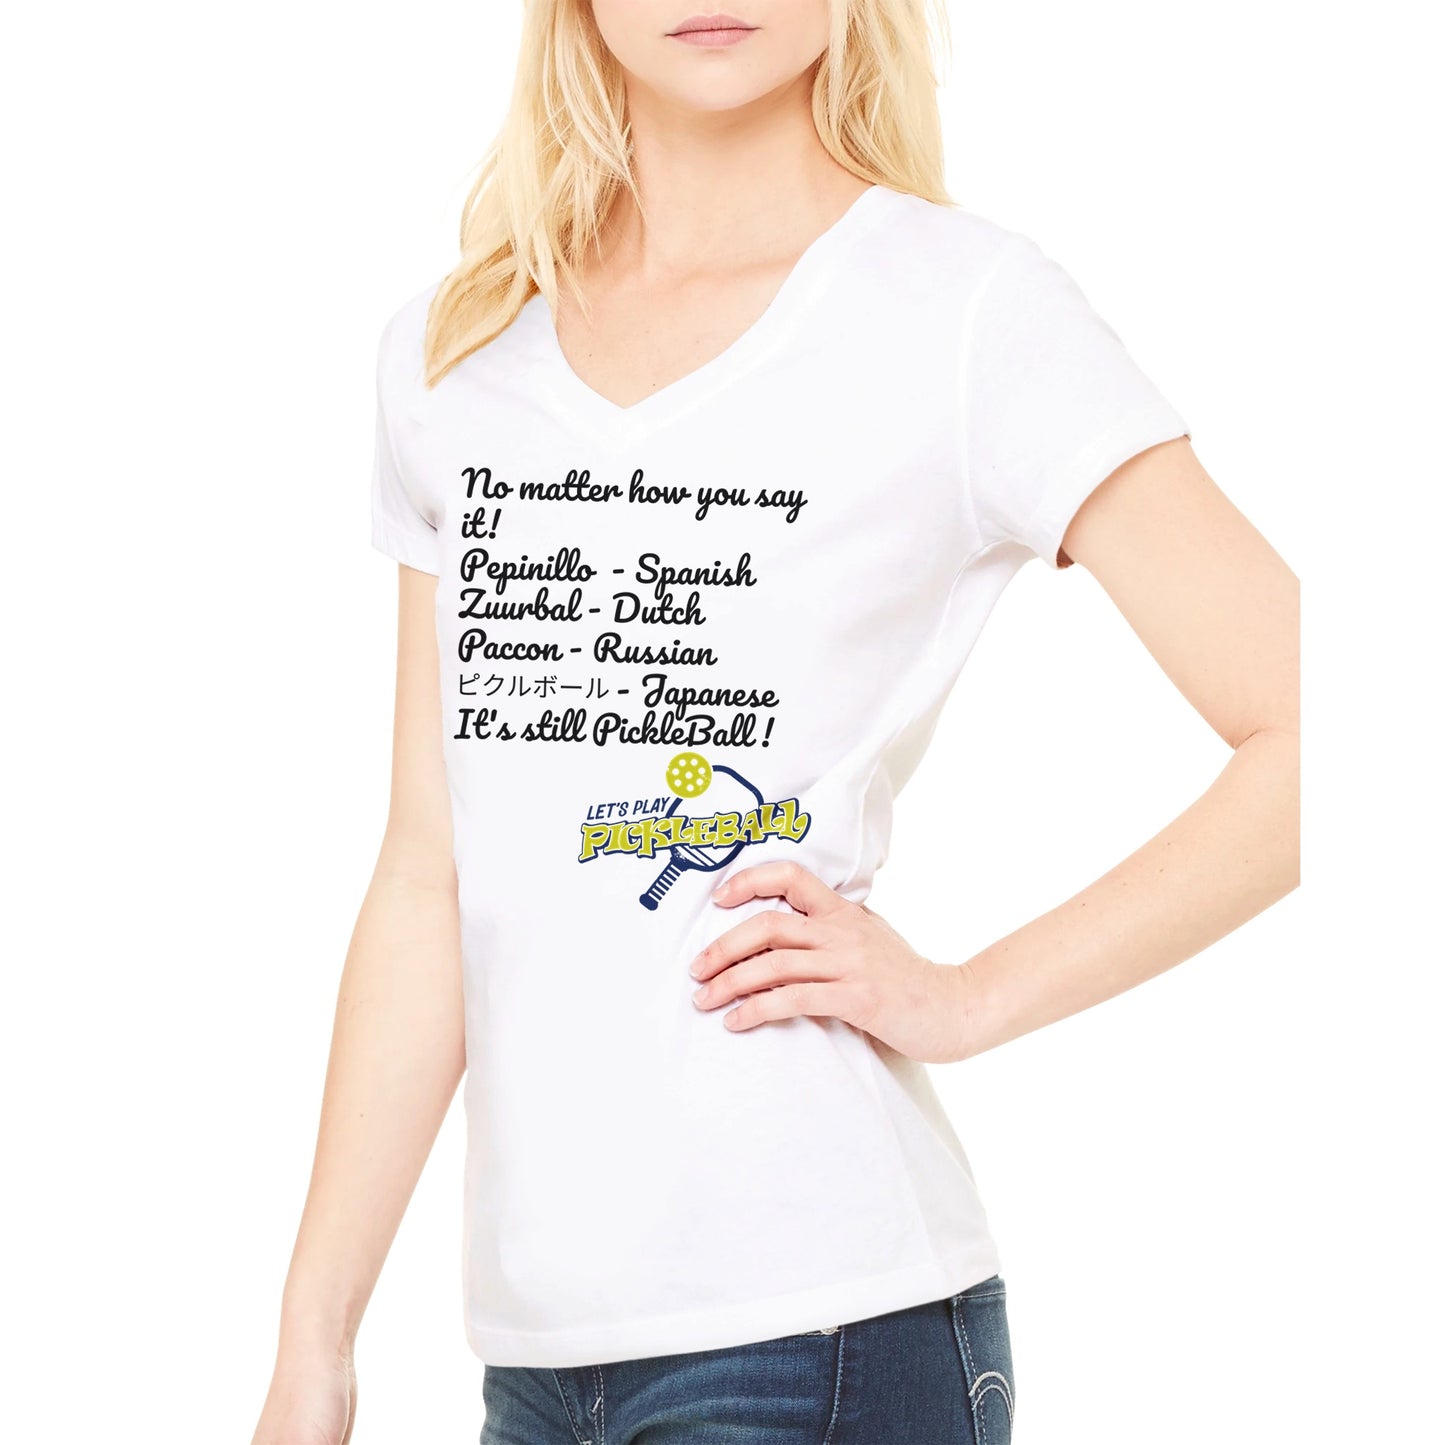 A premium women’s V-neck t-shirt with original logo No matter how you say it it's still Pickleball and Let's Play PIckleball logo on front from WhatYa Say Apparel made from combed and ring-spun cotton worn by blonde hair Female model.